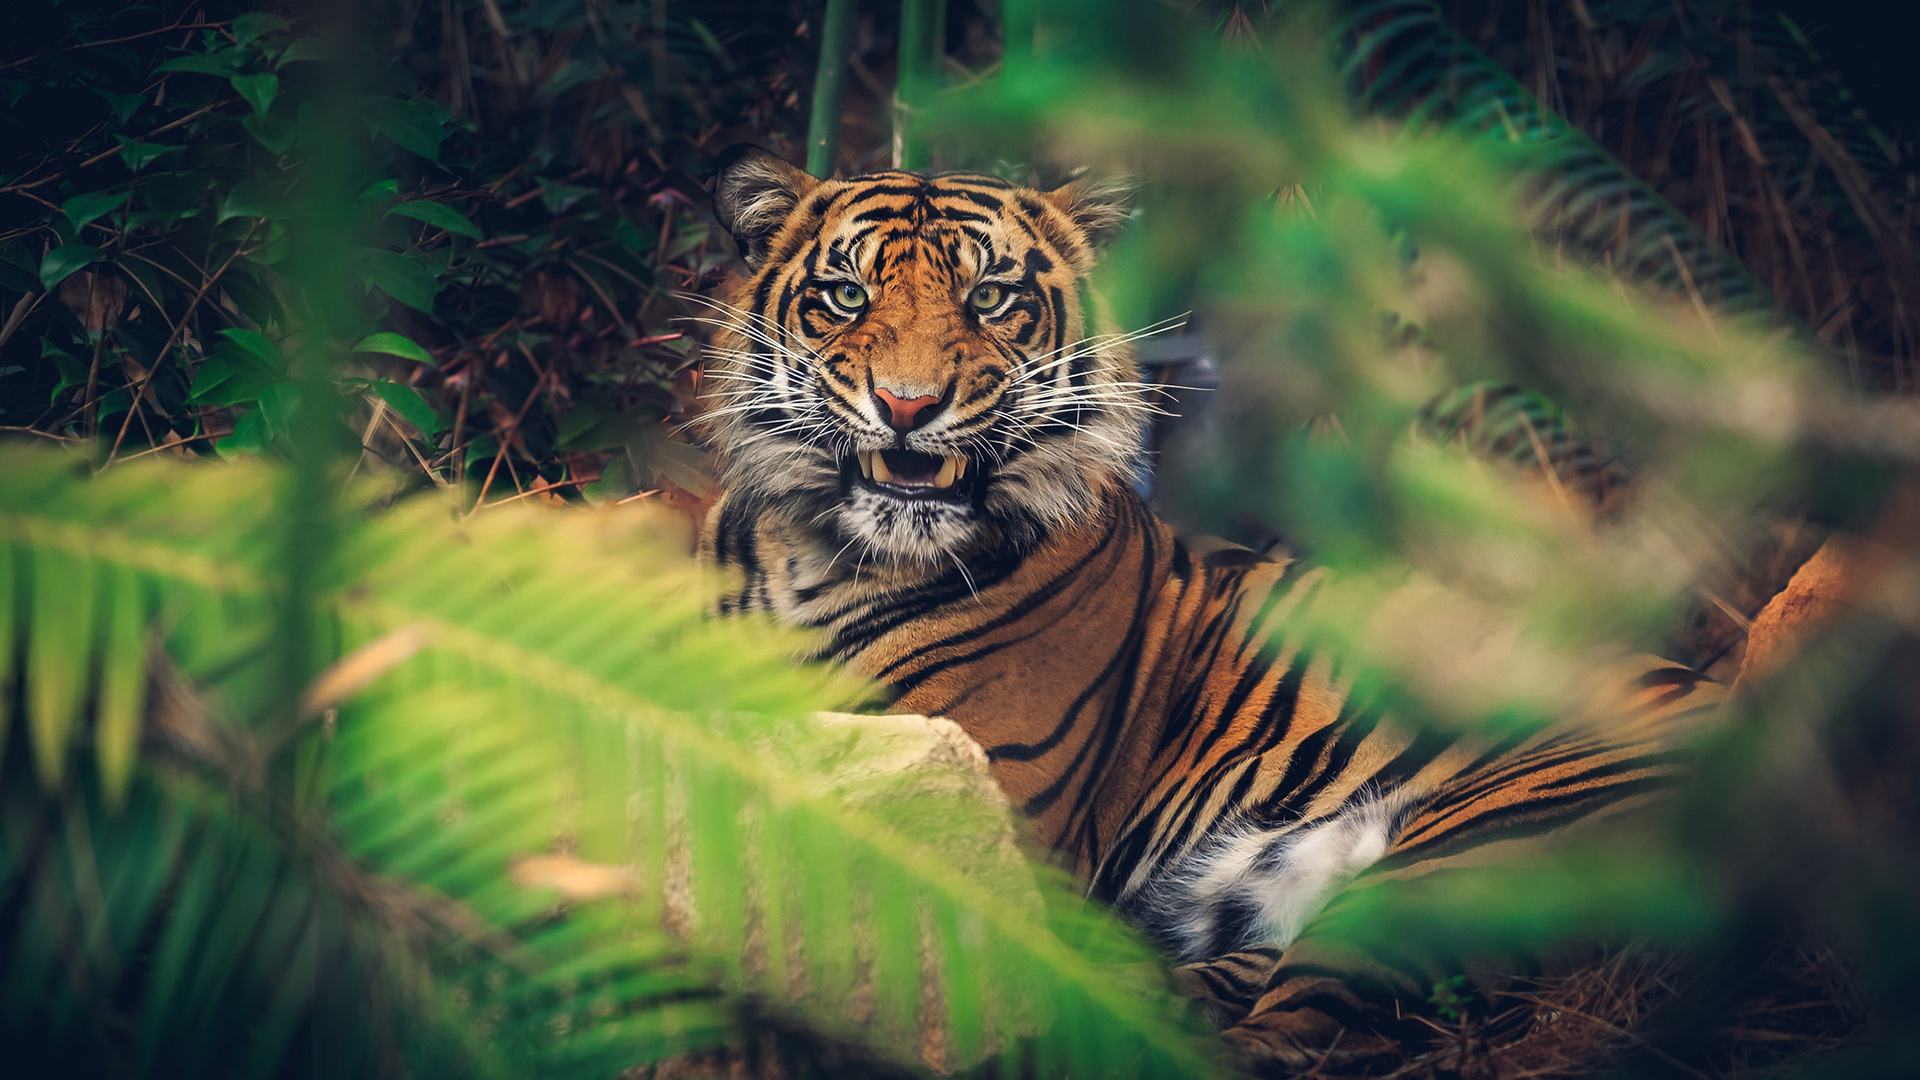 Tiger Full Hd Wallpaper And Background Image | 1920X1080 | Id:551961